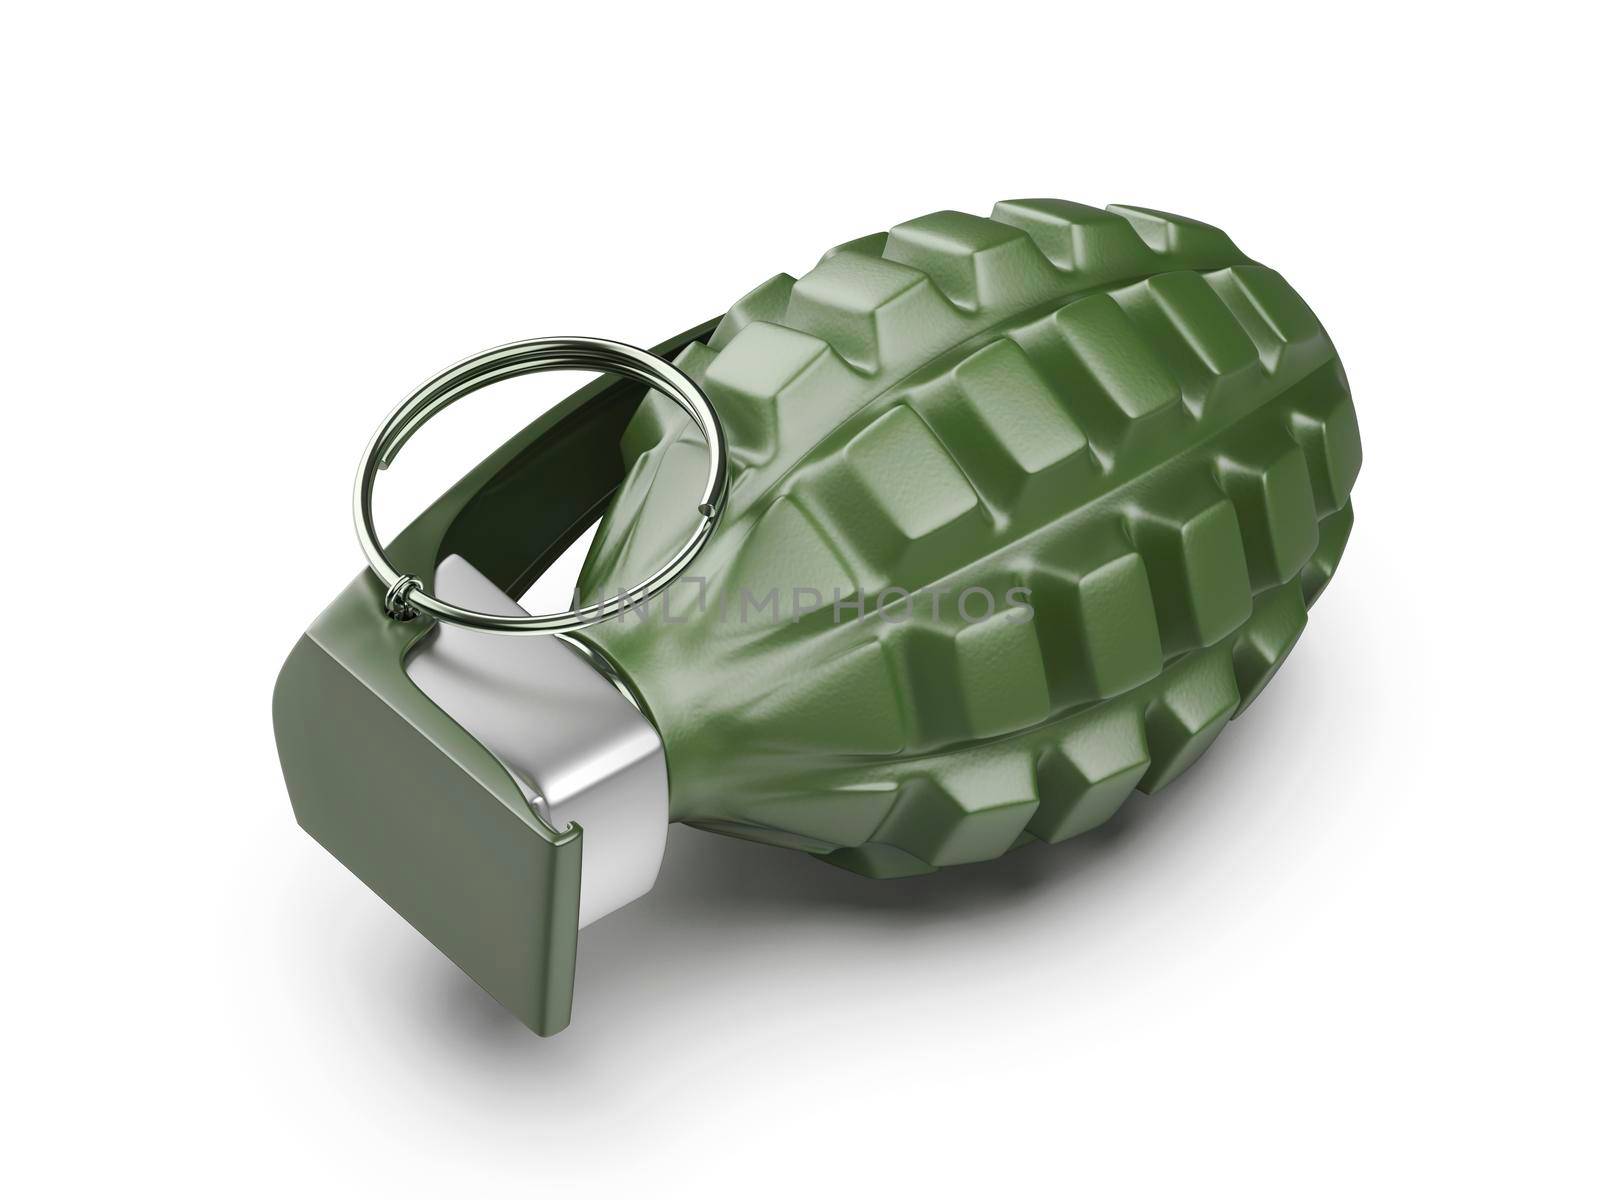 Military hand grenade by magraphics